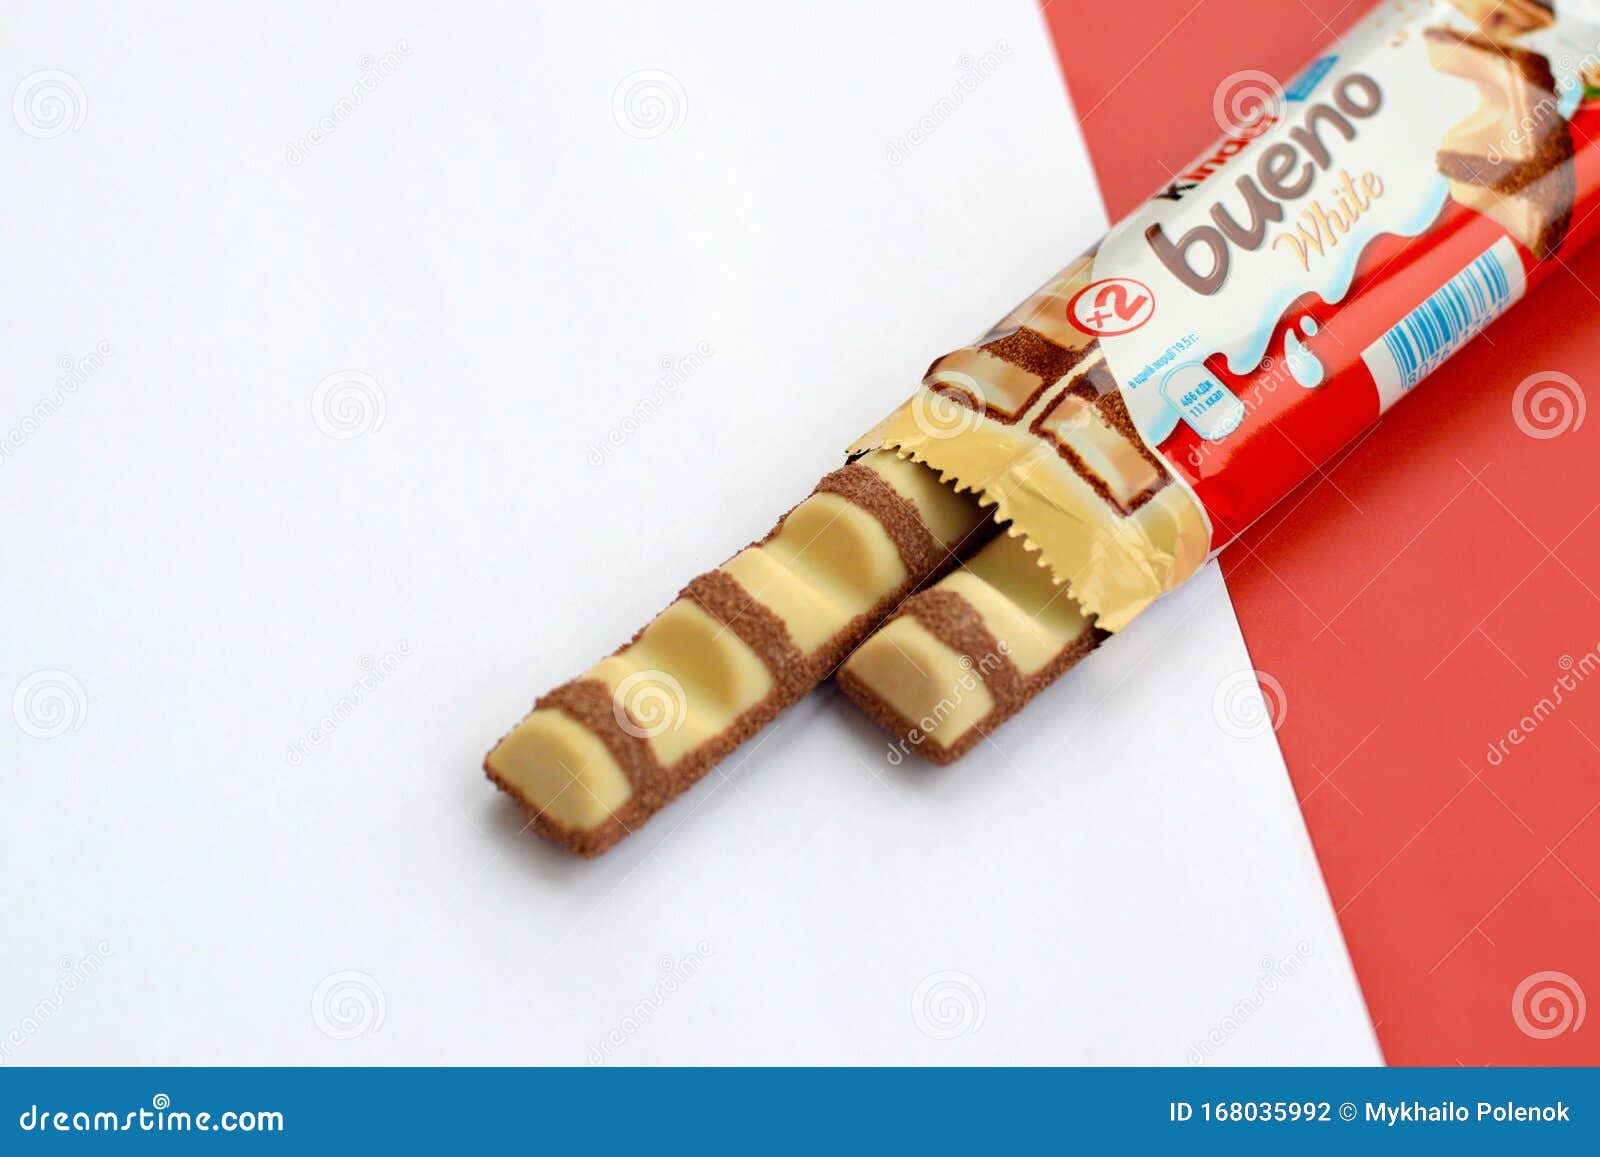 https://thumbs.dreamstime.com/z/ny-usa-december-kinder-bueno-white-chocolate-confectionery-product-brand-line-italian-multinational-manufacturer-ferrero-168035992.jpg